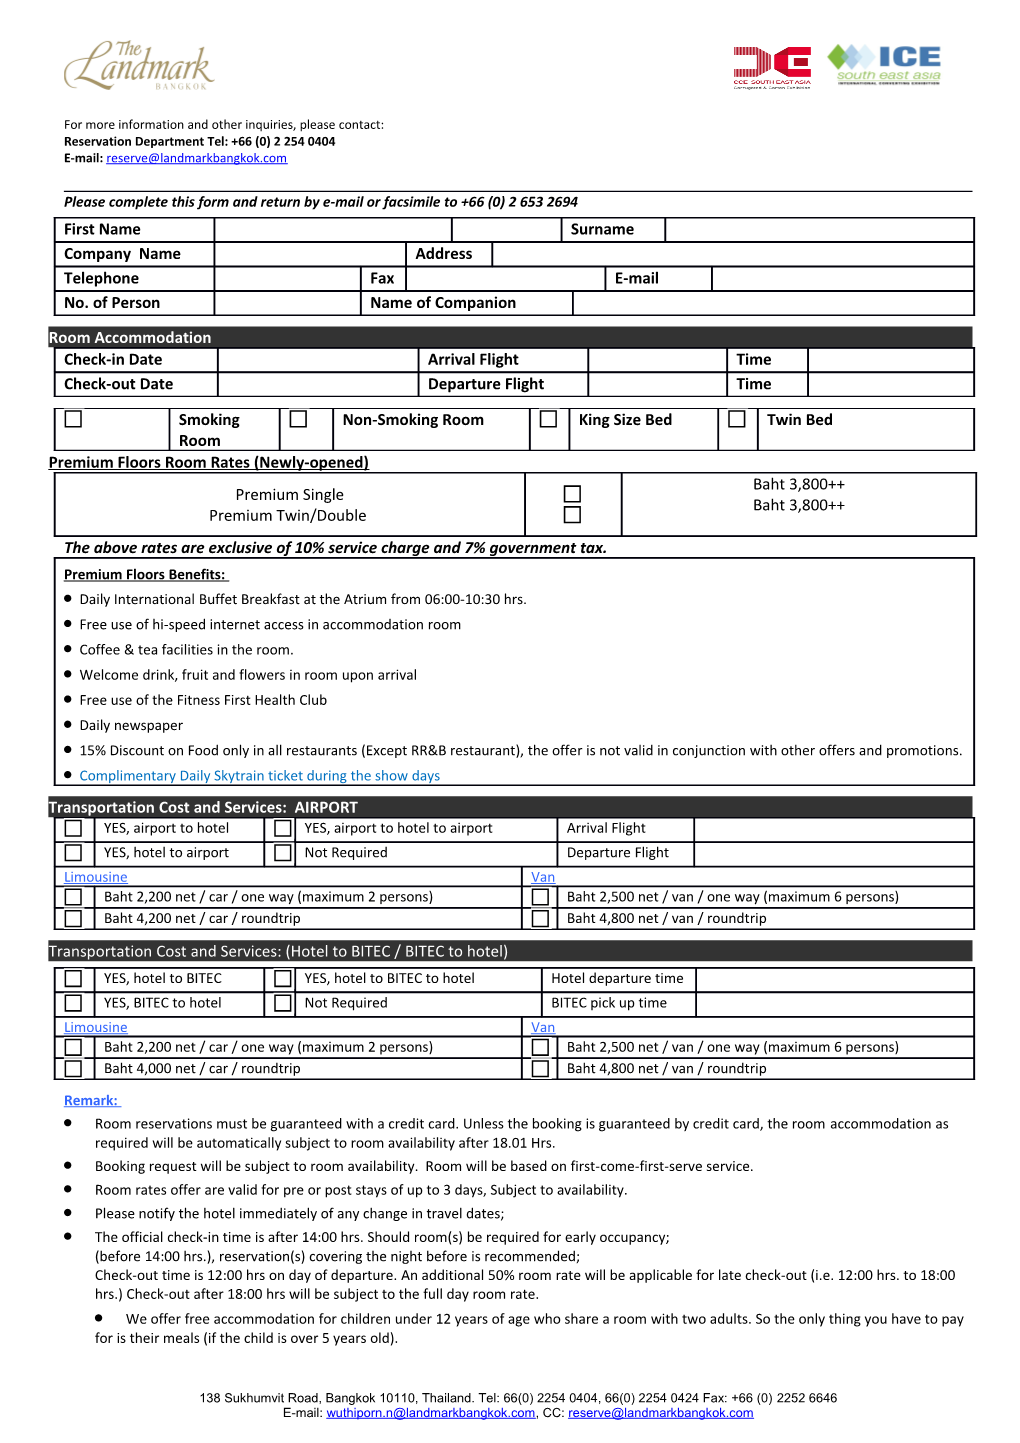 Please Complete This Form and Return by E-Mail Or Facsimile to +66 (0) 2 653 2694